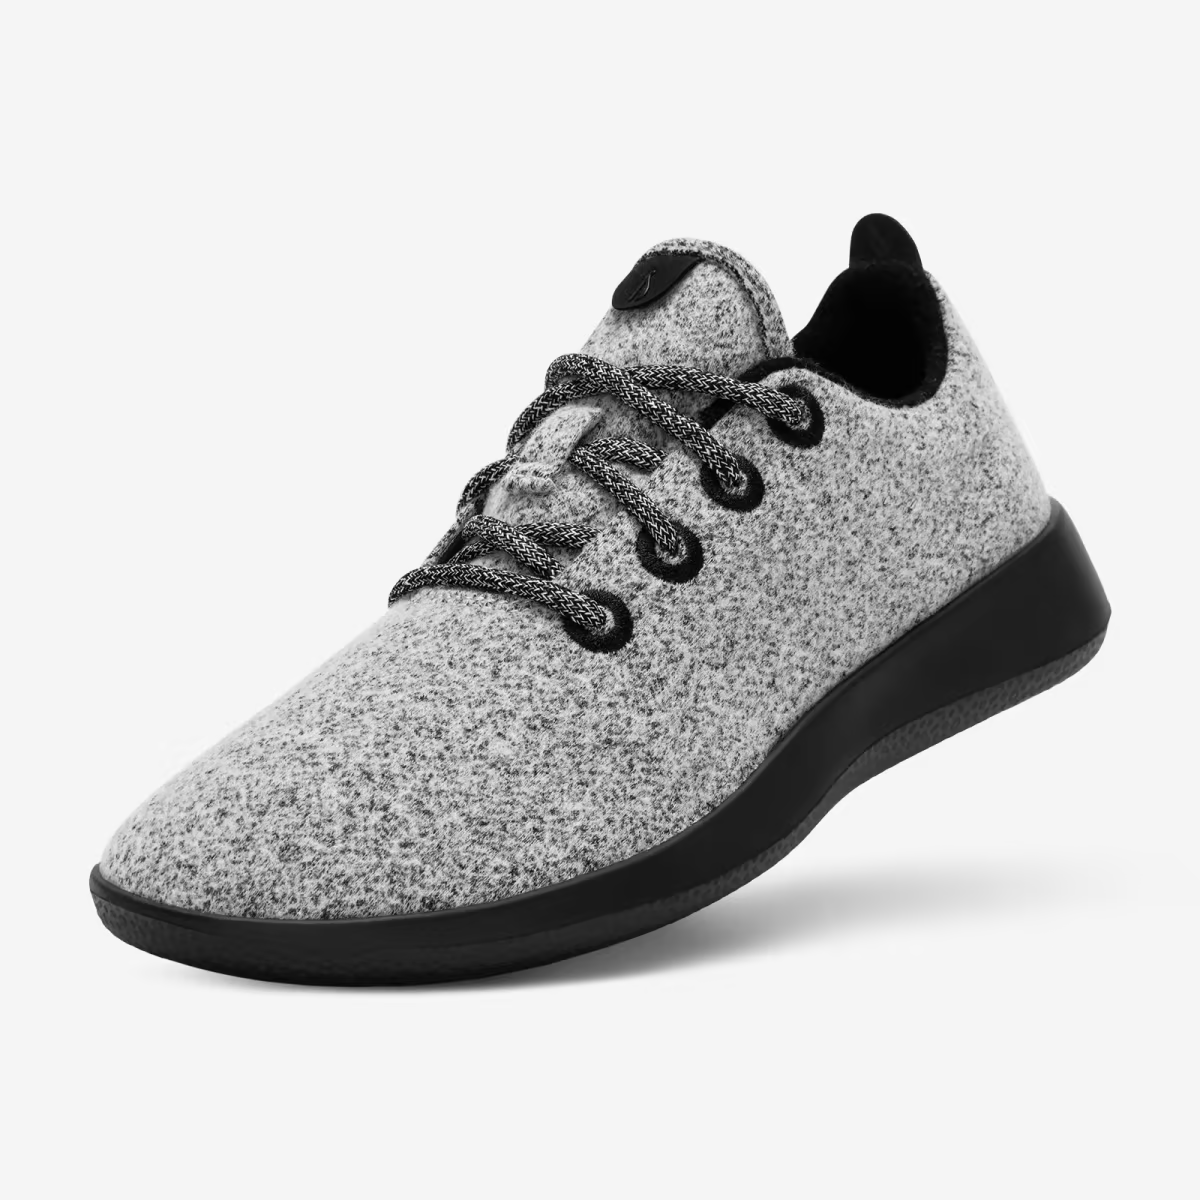 Allbirds Wool Runners Shoes Review